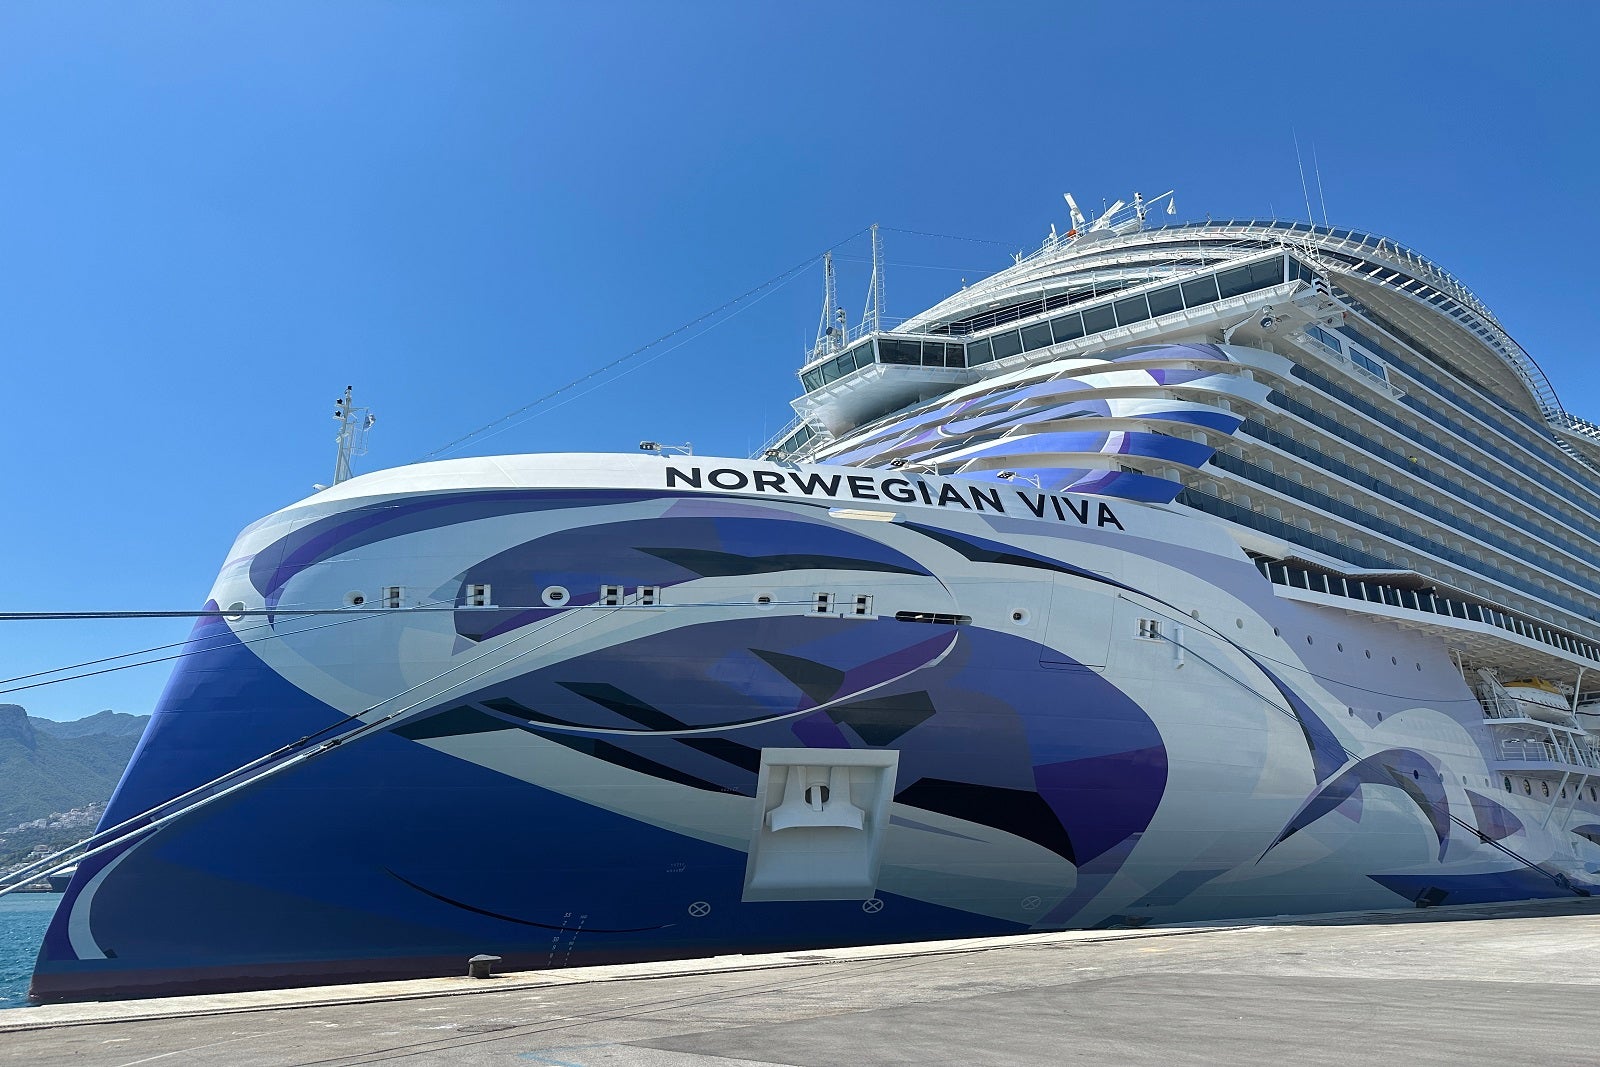 Starboard Cruise Services, Carnival Cruise Line Extend Retail Partnership -  Cruise Industry News